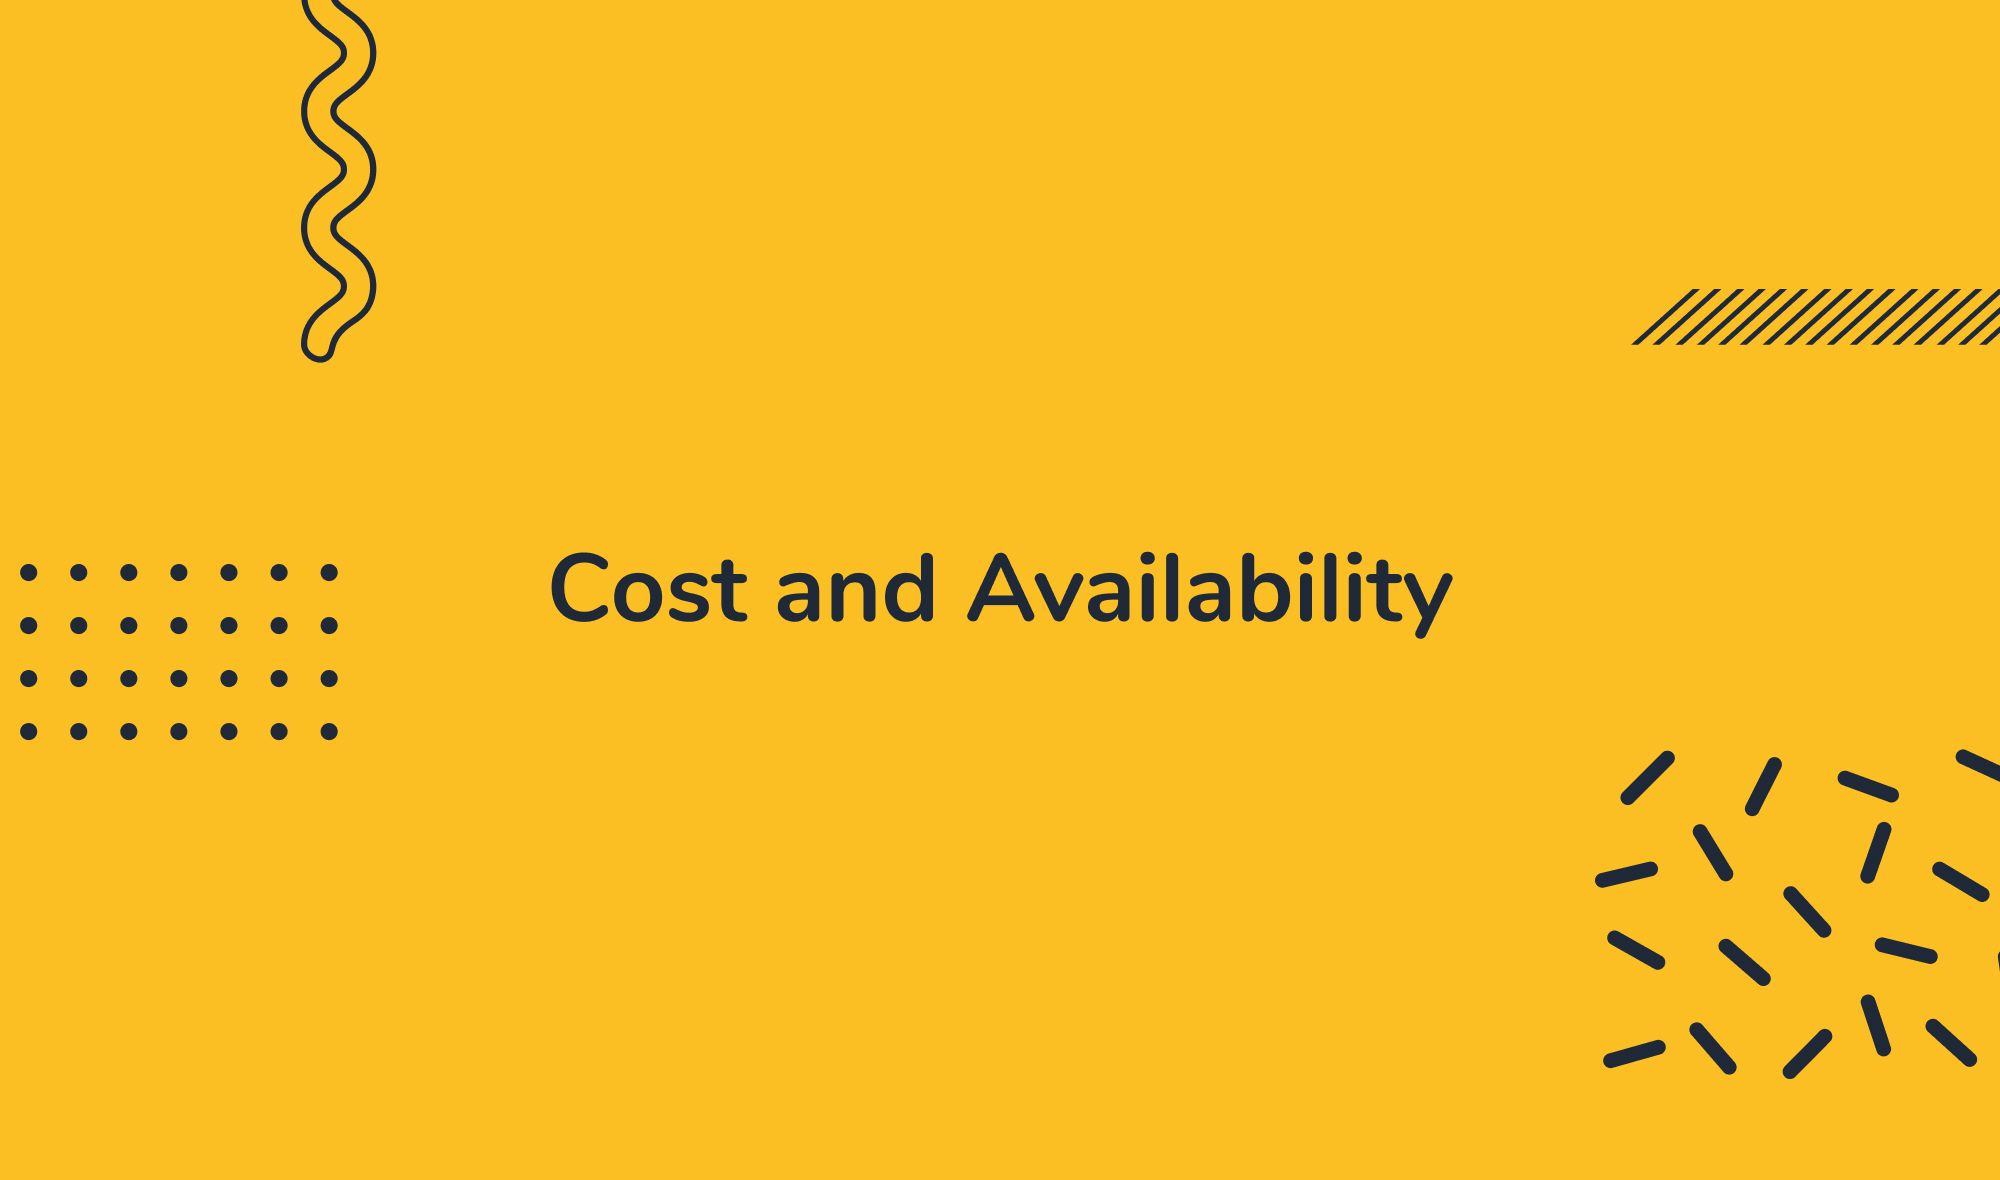 Cost and Availability